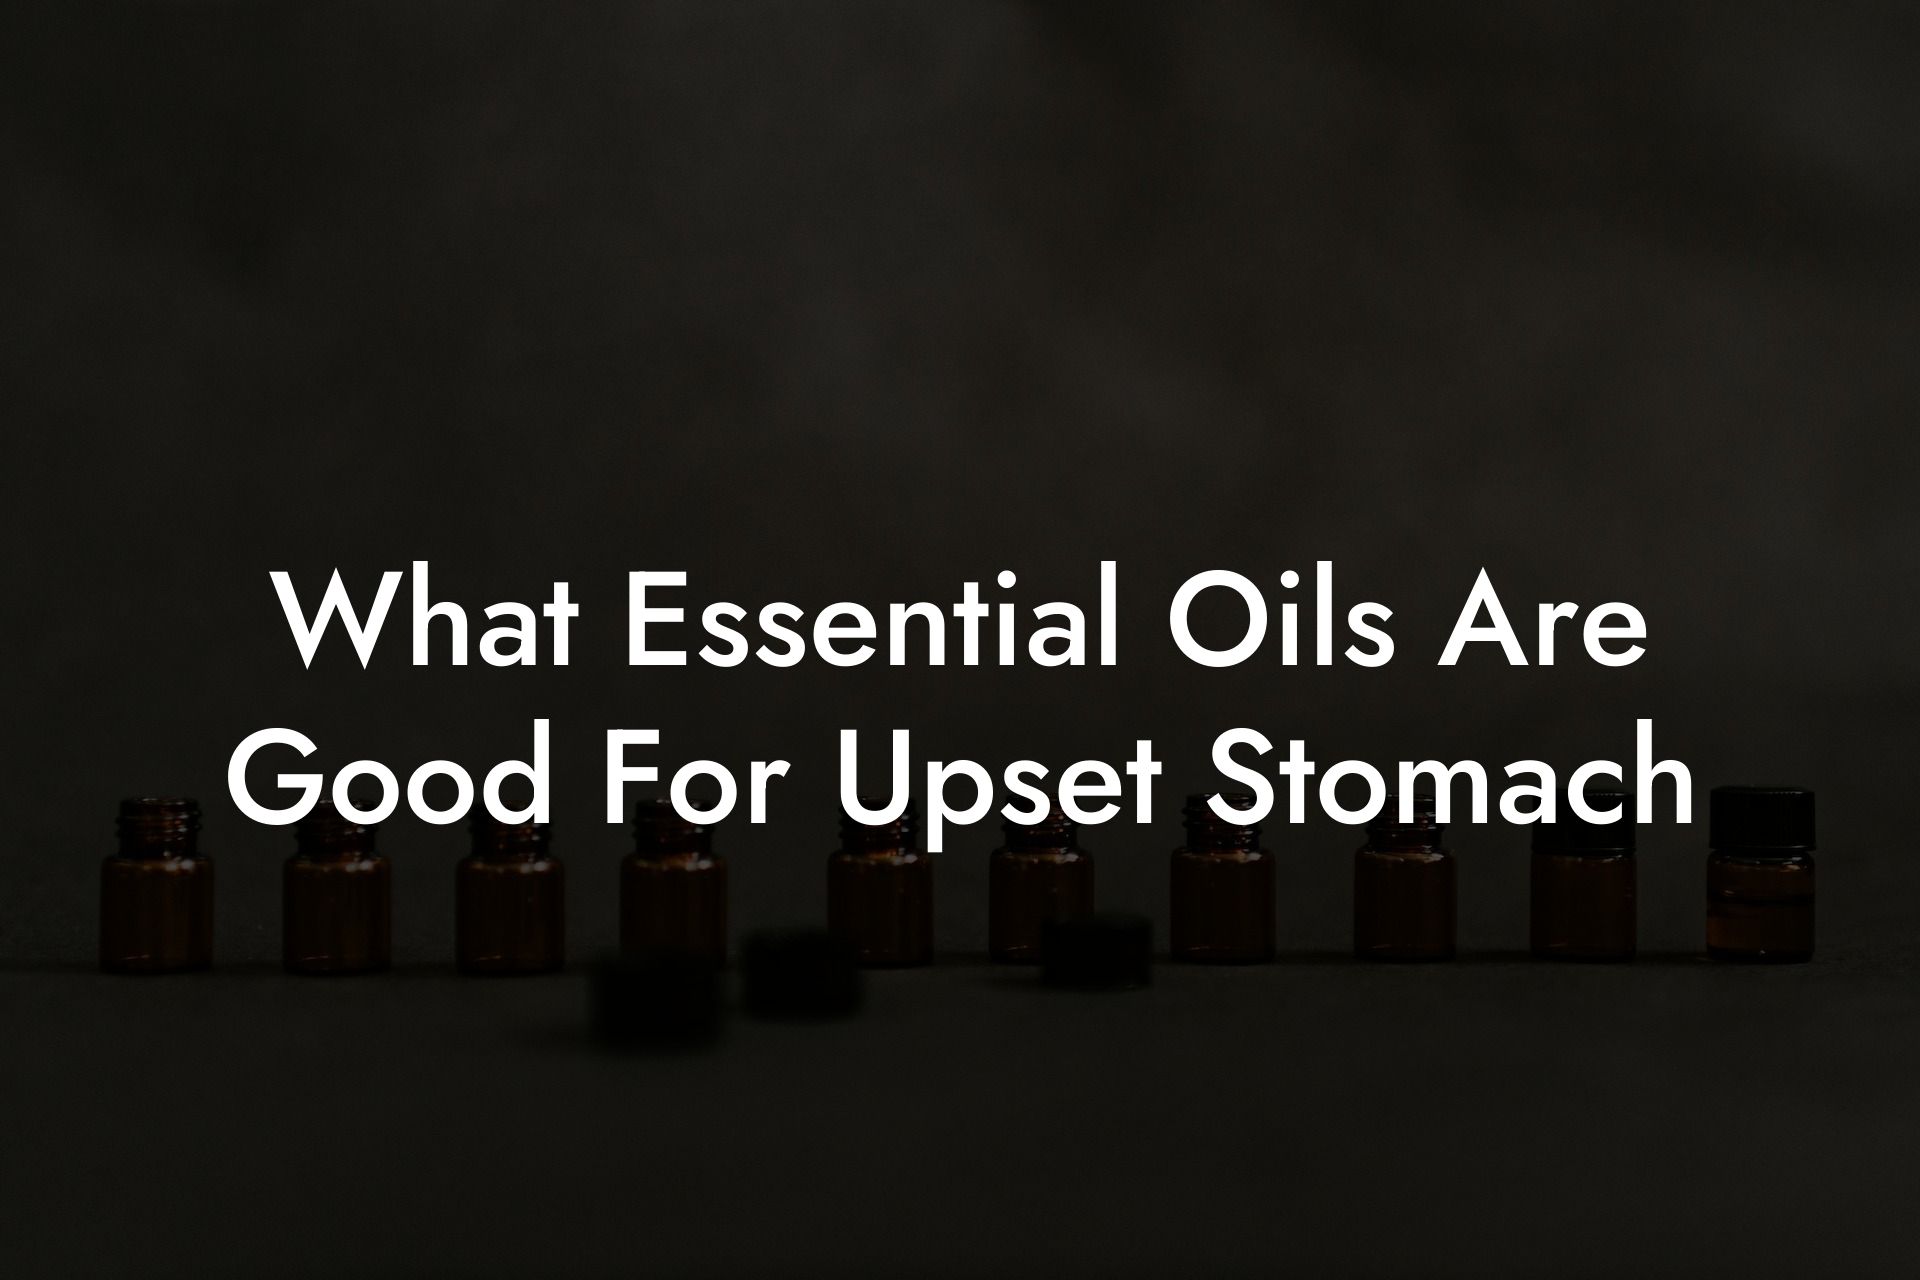 What Essential Oils Are Good For Upset Stomach